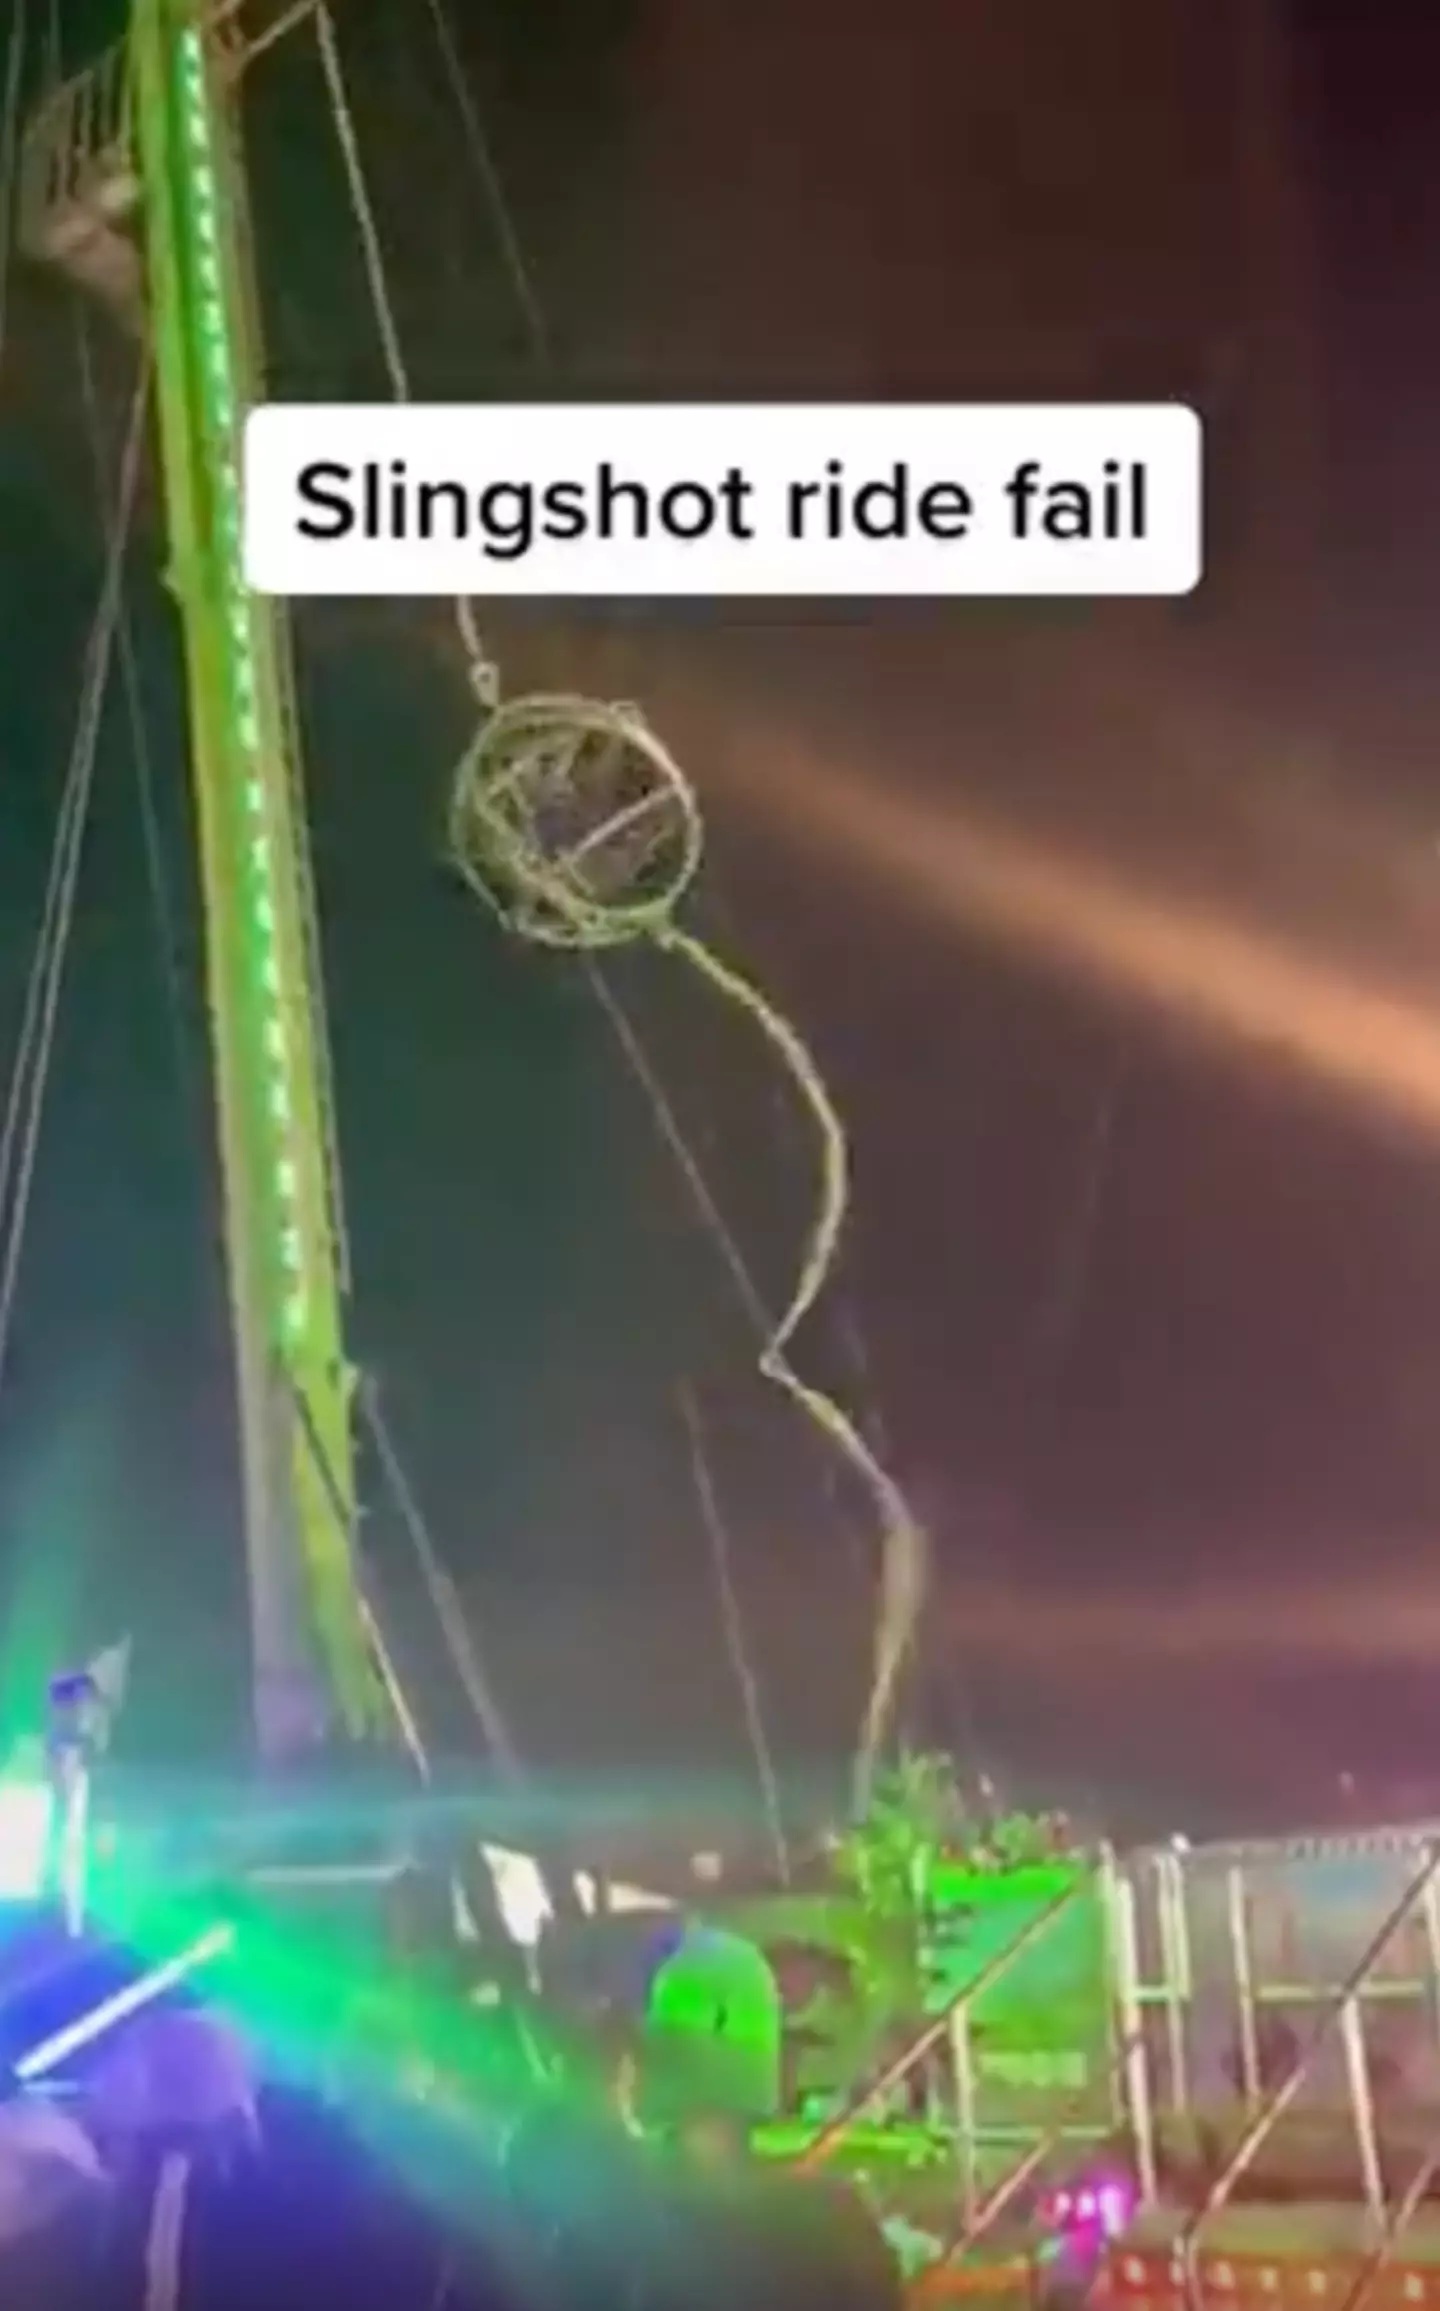 The ride malfunctioned, leaving two people trapped inside.